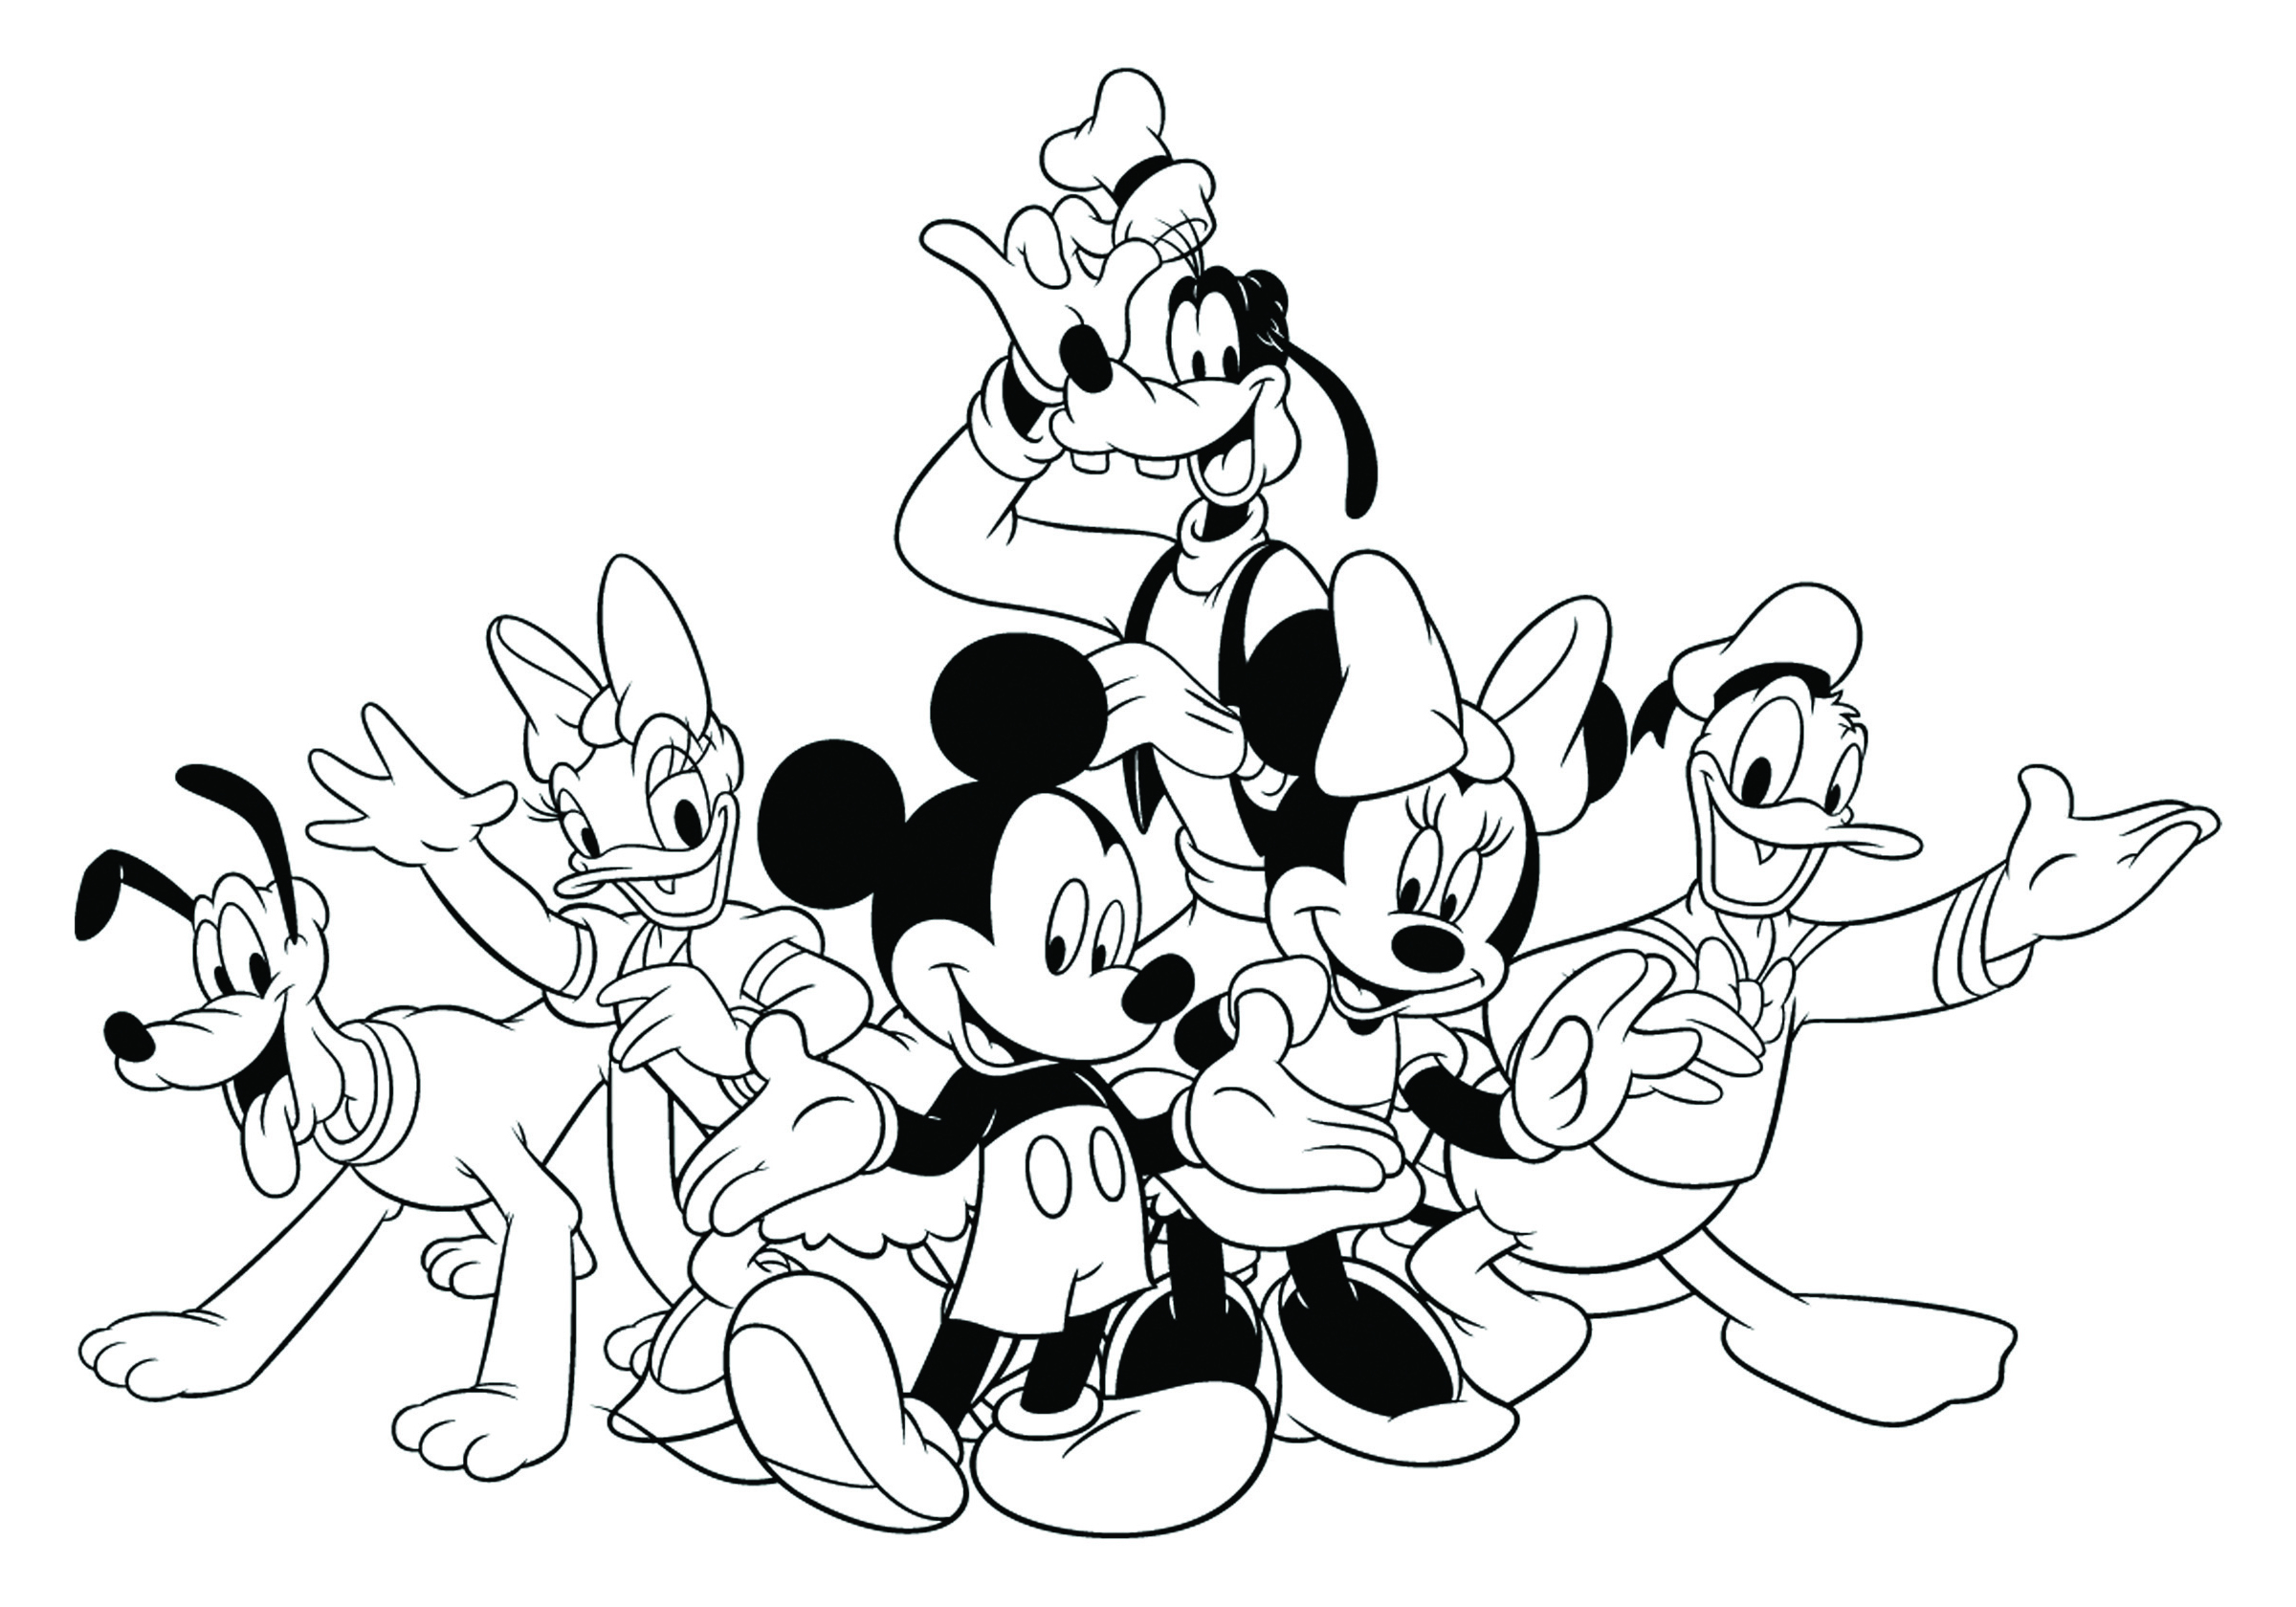 Disney.com Coloring Pages Disney Mickeys Typing Adventure Coloring Page Disney Family